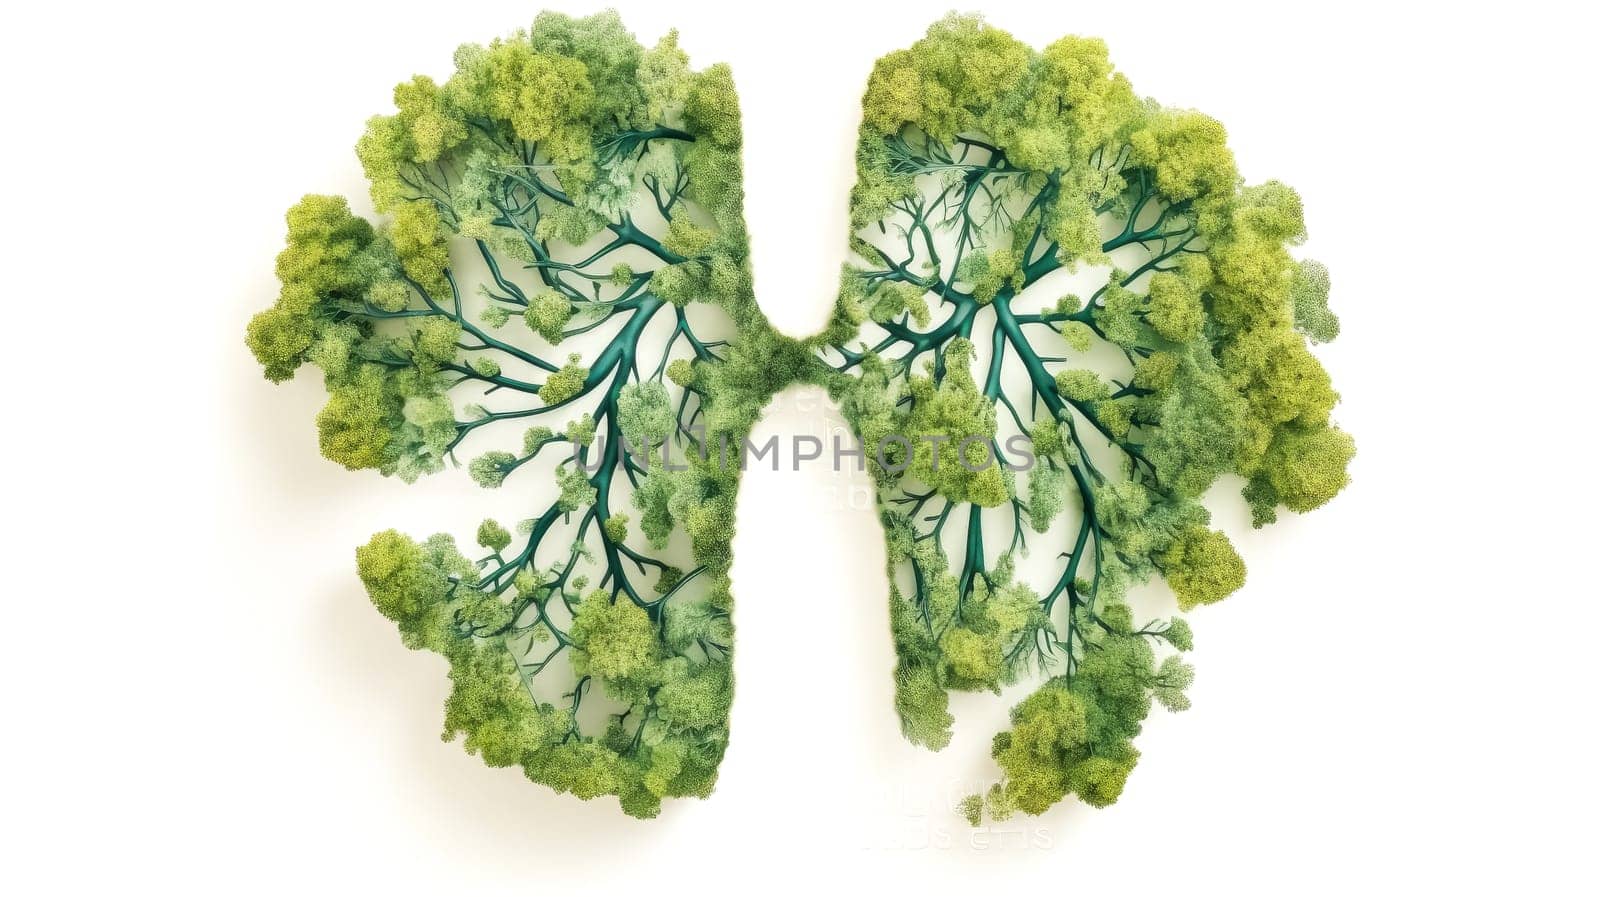 Breath of life, Lungs taking the form of a tree, a poignant concept linking our respiratory health with the oxygen generating power of nature